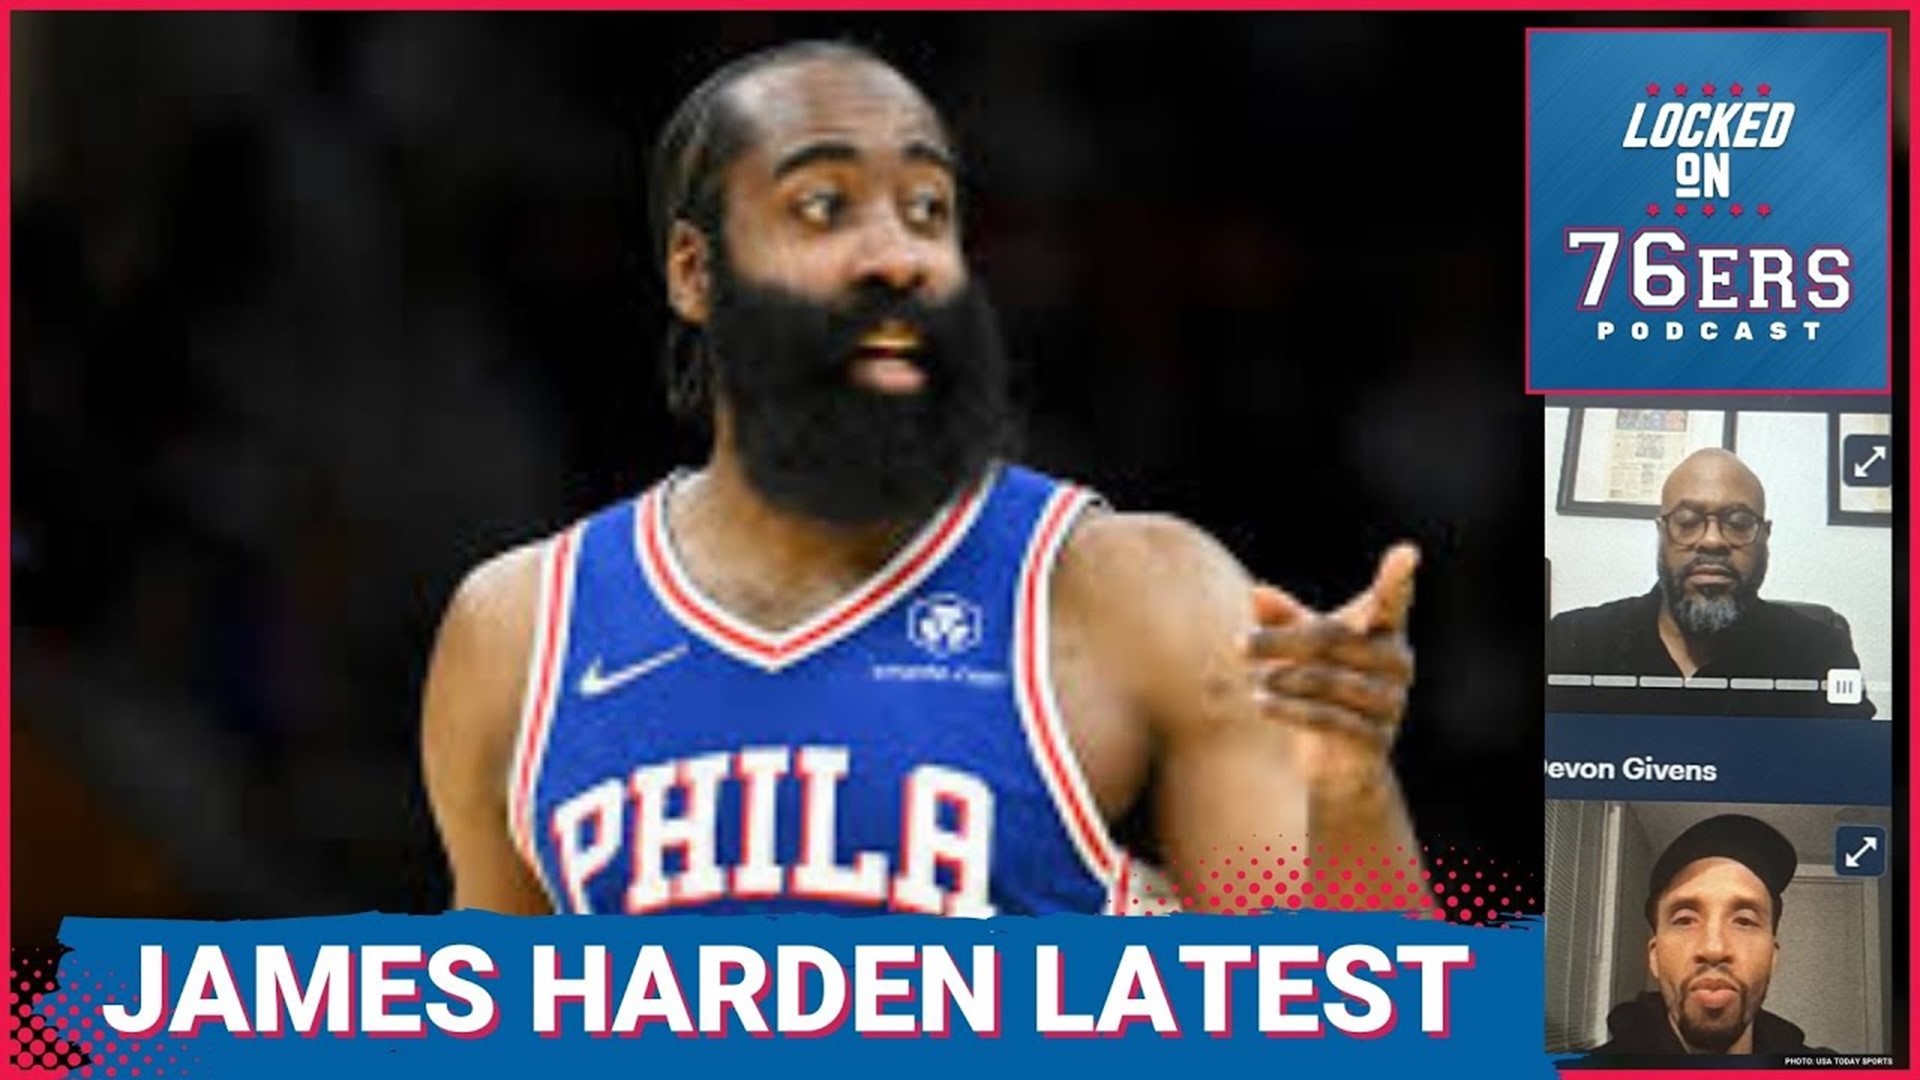 james harden philly jersey